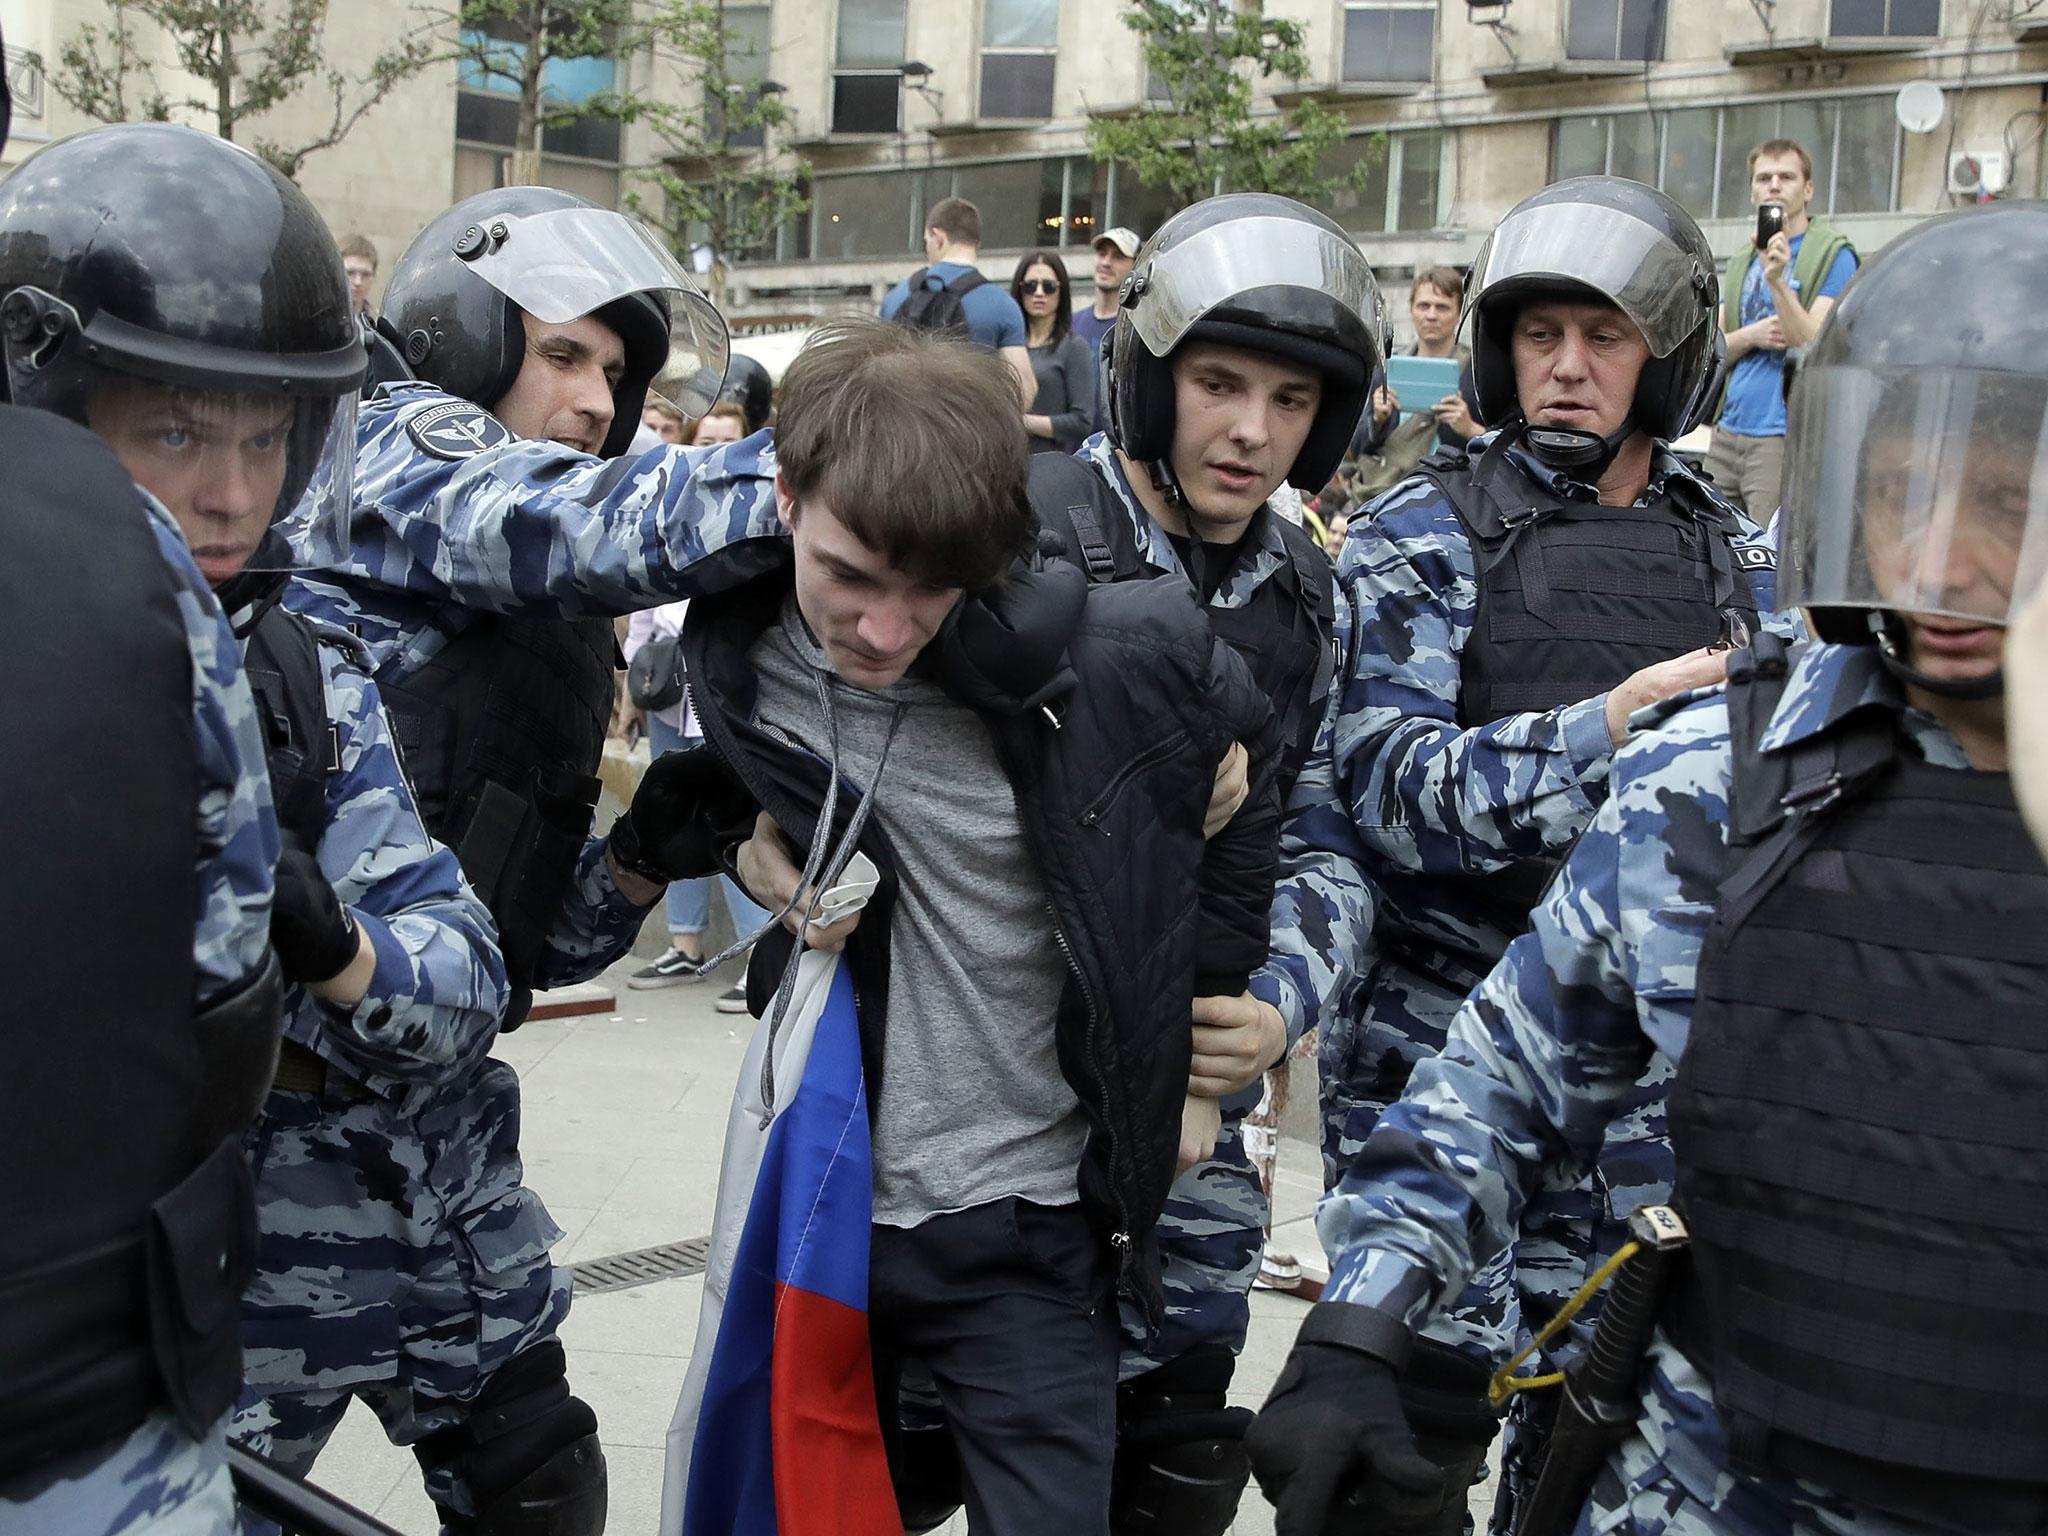 Russian media reports at least three hundred arrests were made